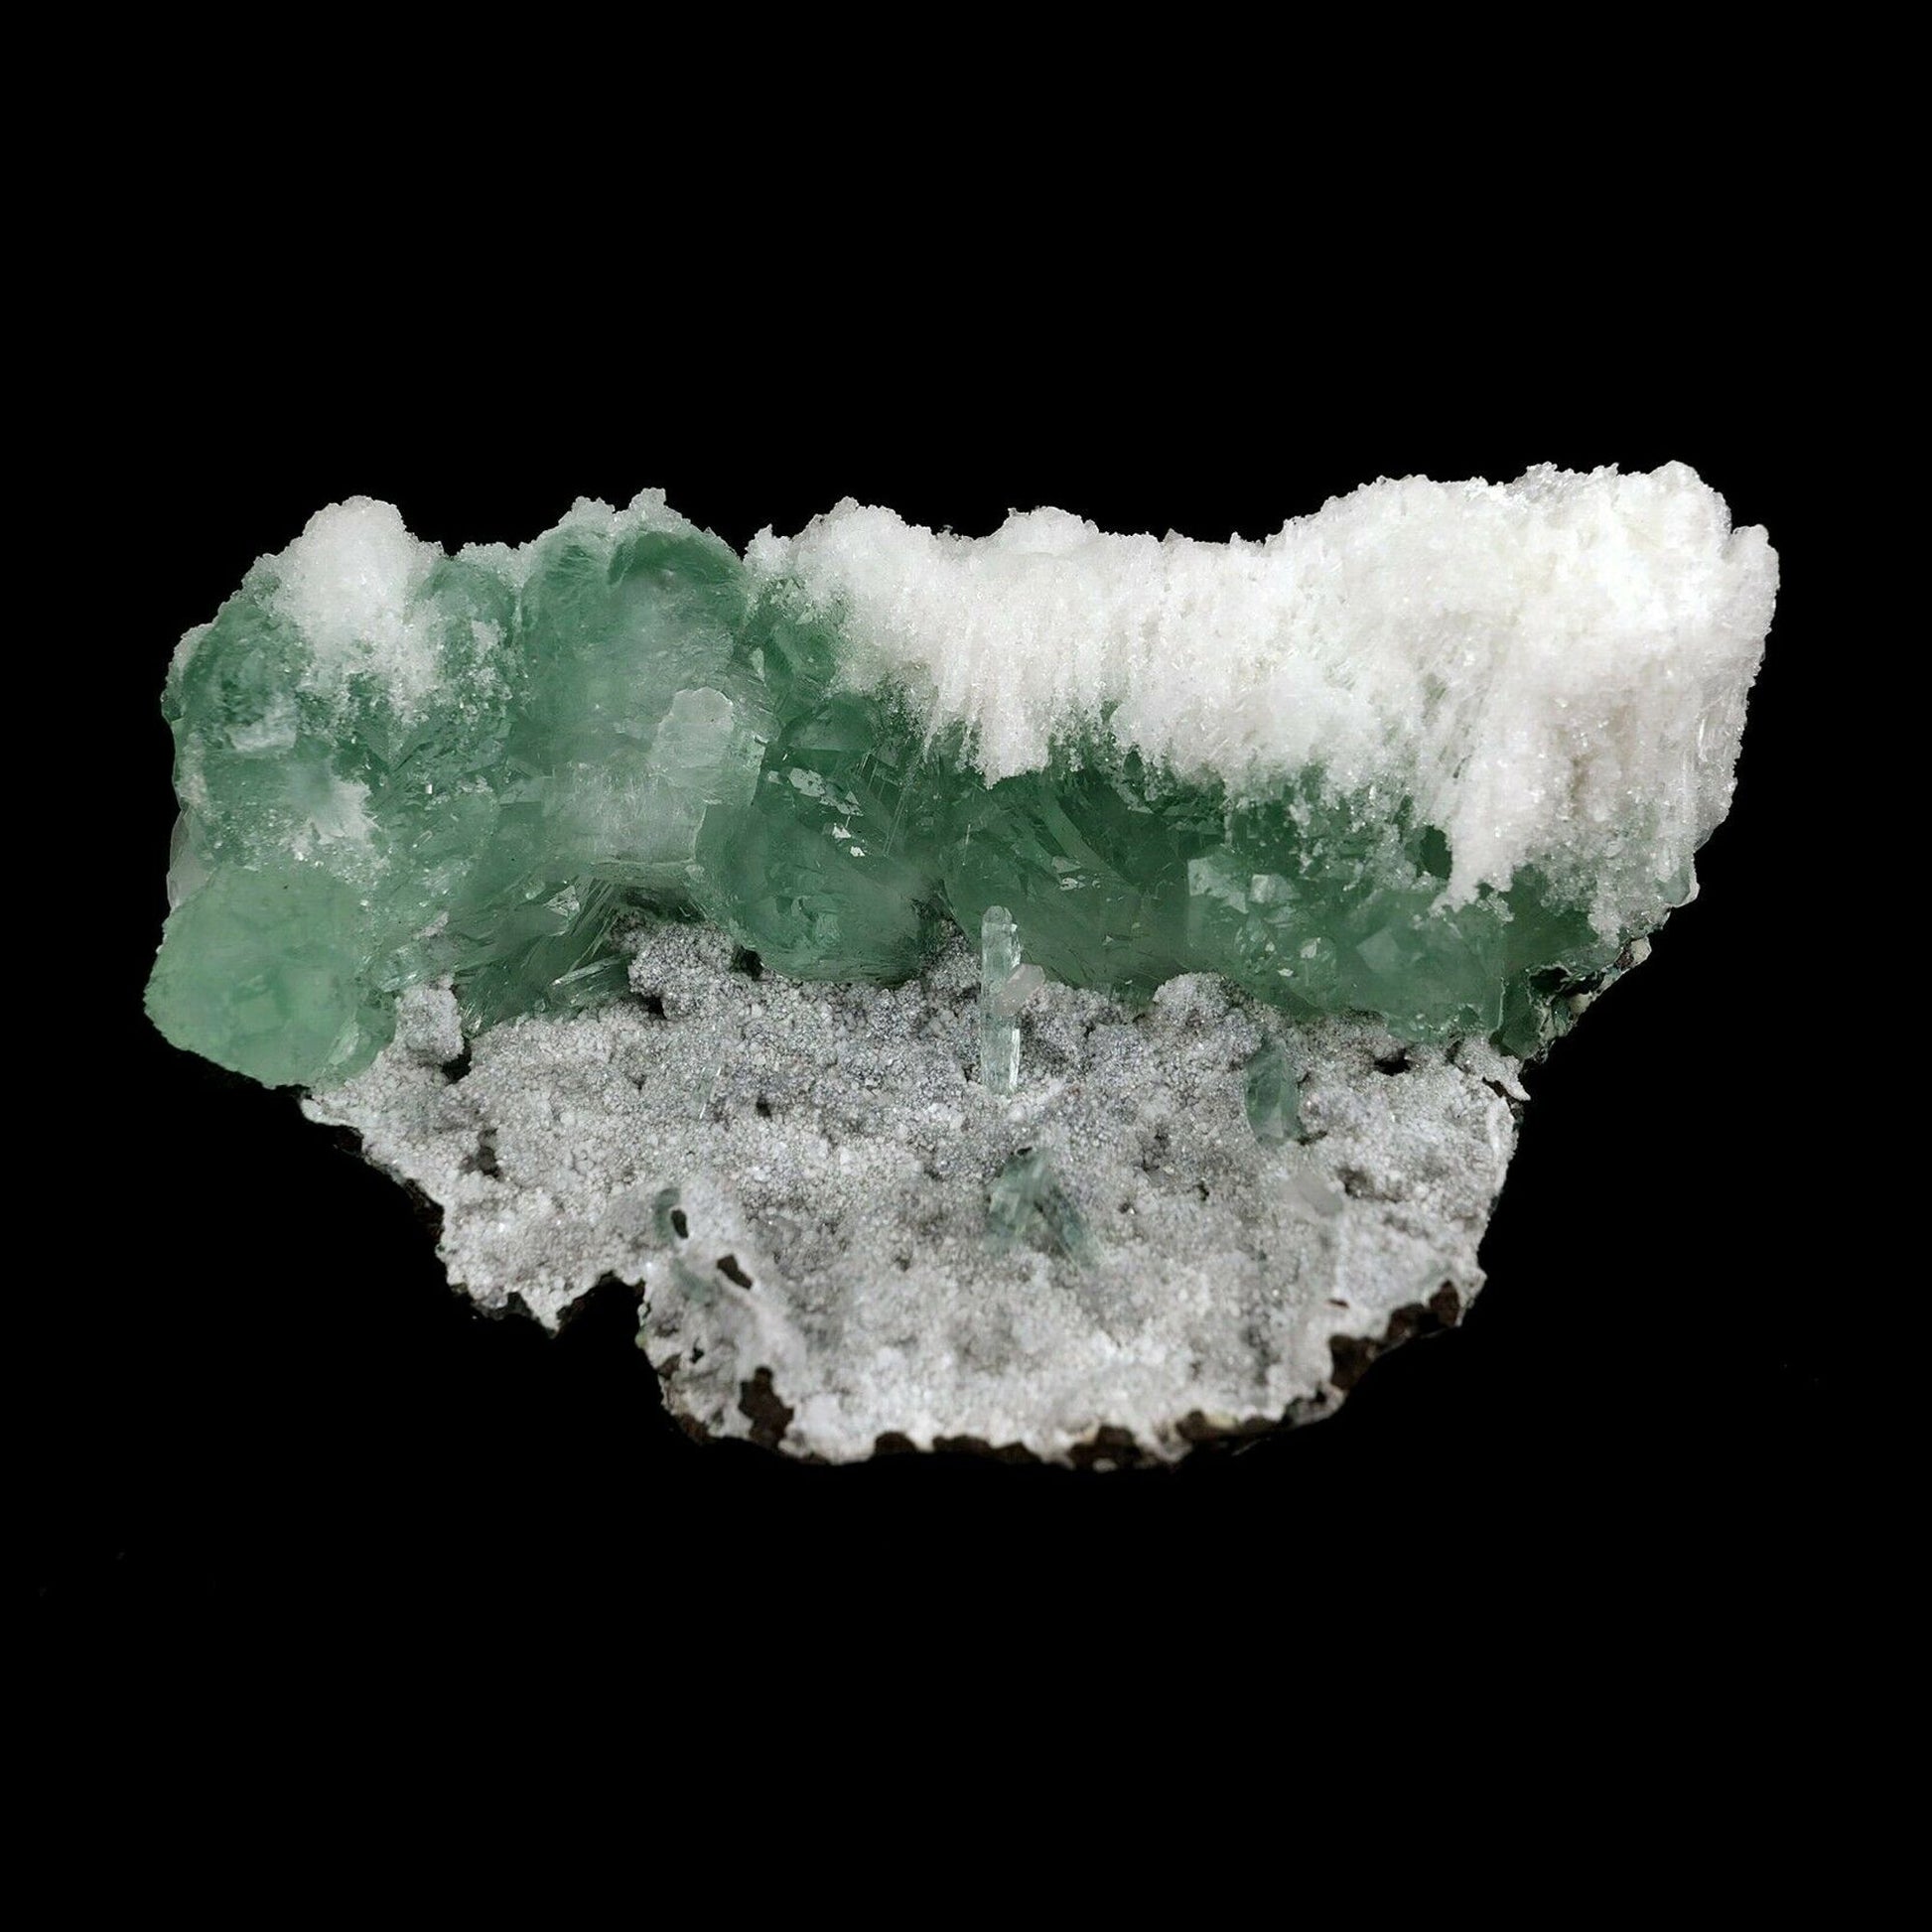 Apophyllite Green with Scolecite on Chalcedony Natural Mineral Specimen B3738 https://www.superbminerals.us/products/apophyllite-green-with-scolecite-on-chalcedony-natural-mineral-specimen-b-3738 This piece has various gemmy, radiant, straightforward groups of green Apophyllite precious crystals, profoundly pursued for their lucidity and rich green tone, on it various bunches of white, clear scolecite splashes, all on a grid of white, shimmering Chalcedony. An excellent and gaudy piece 